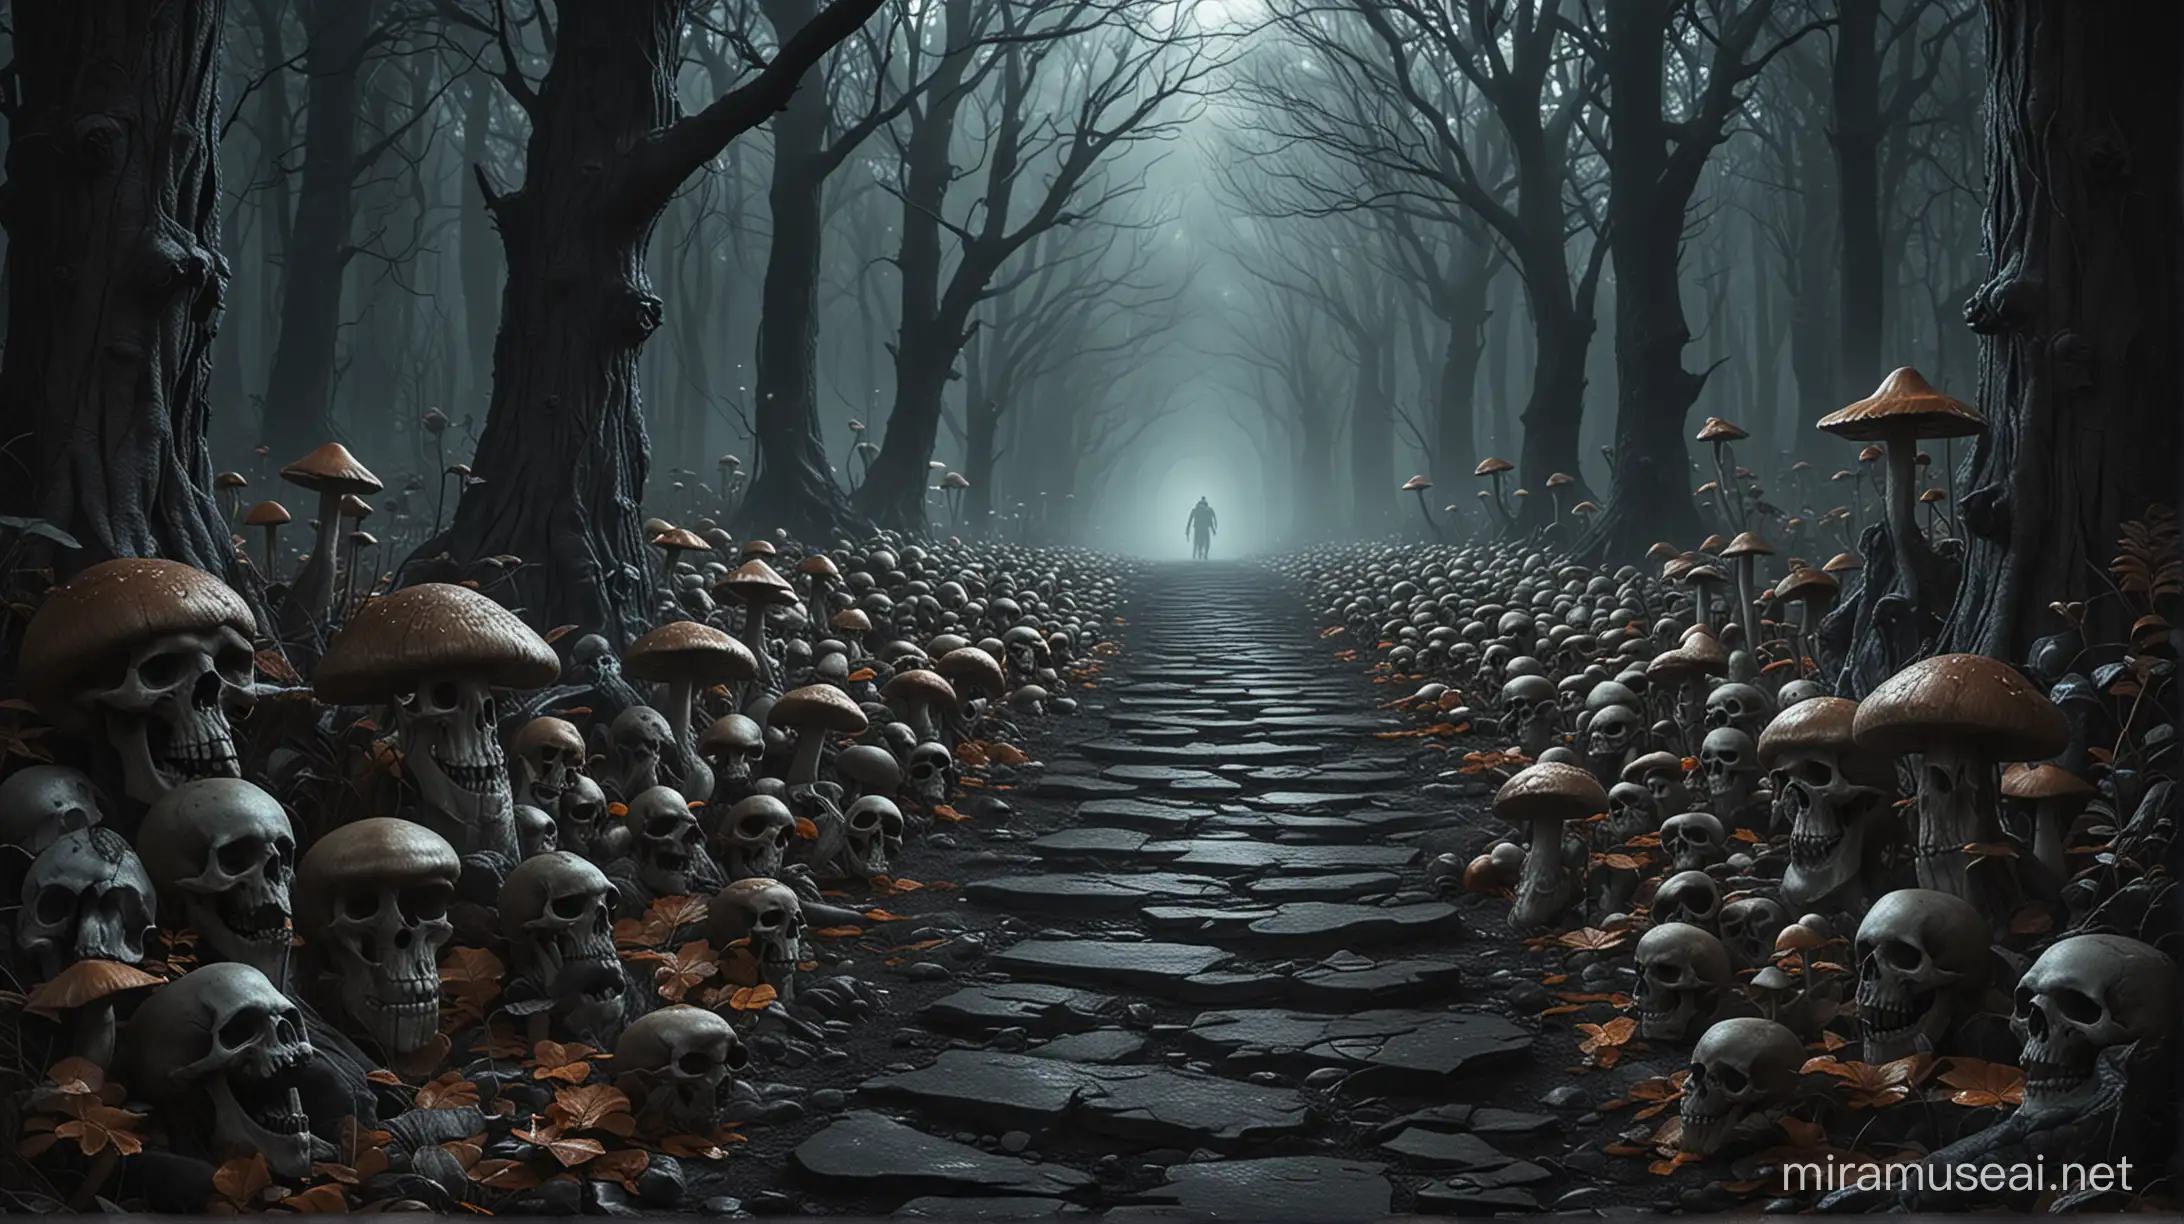 Dark pathway with skulls to another enchanted fantasy world with mushrooms